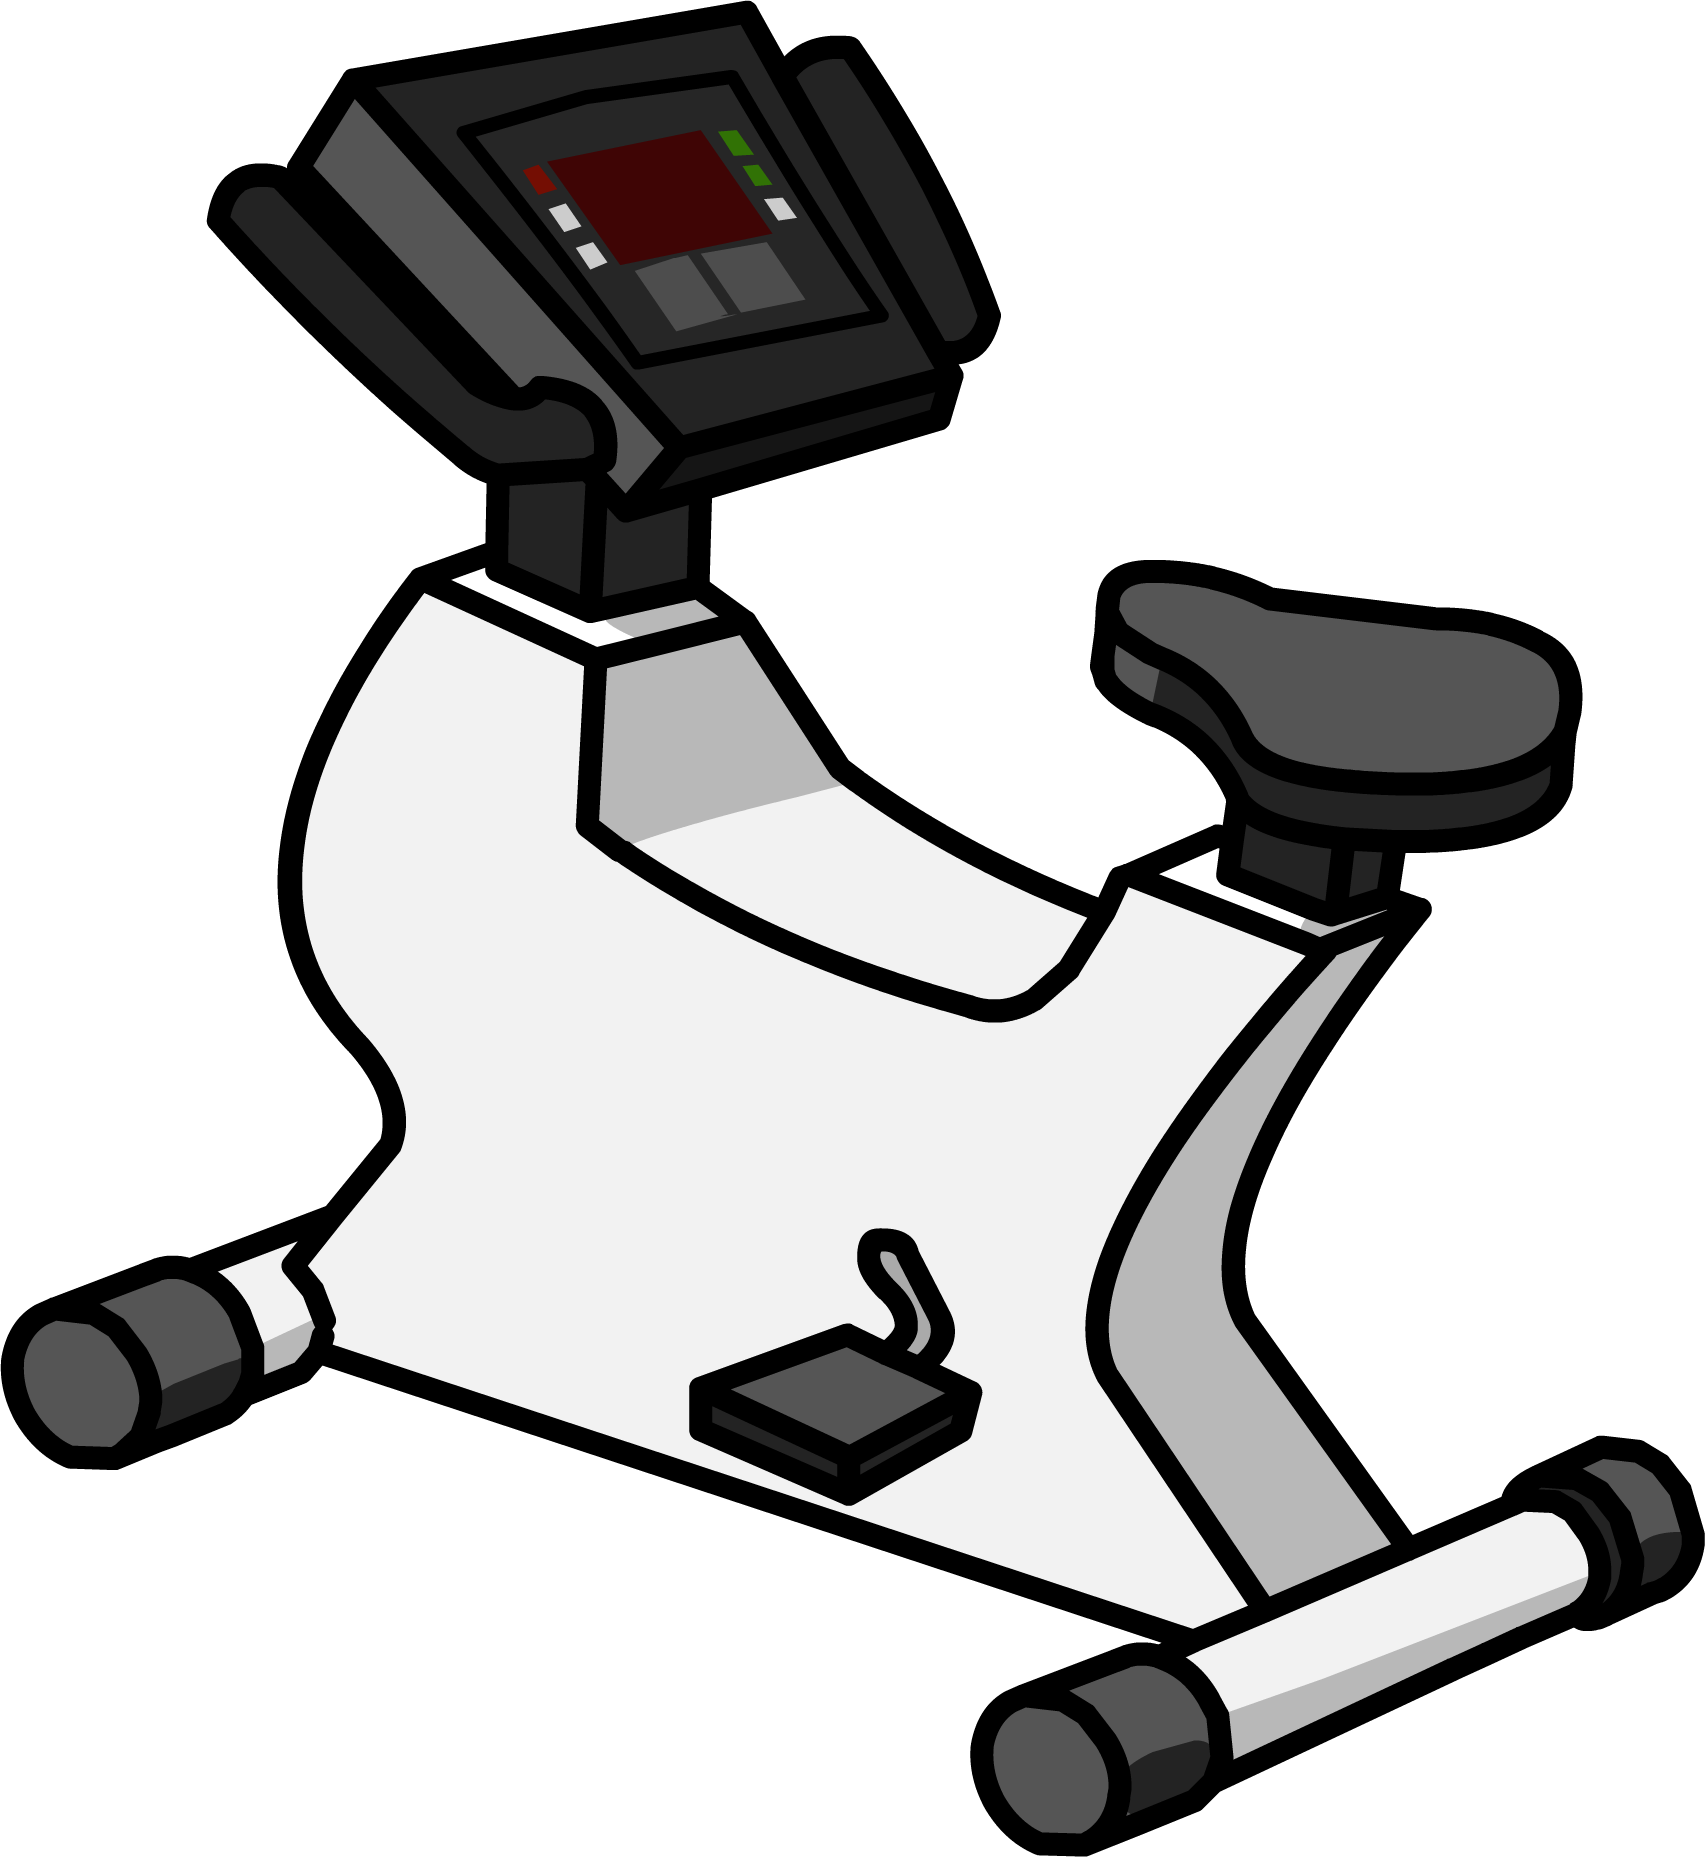 Exercise Bike PNG - 3628